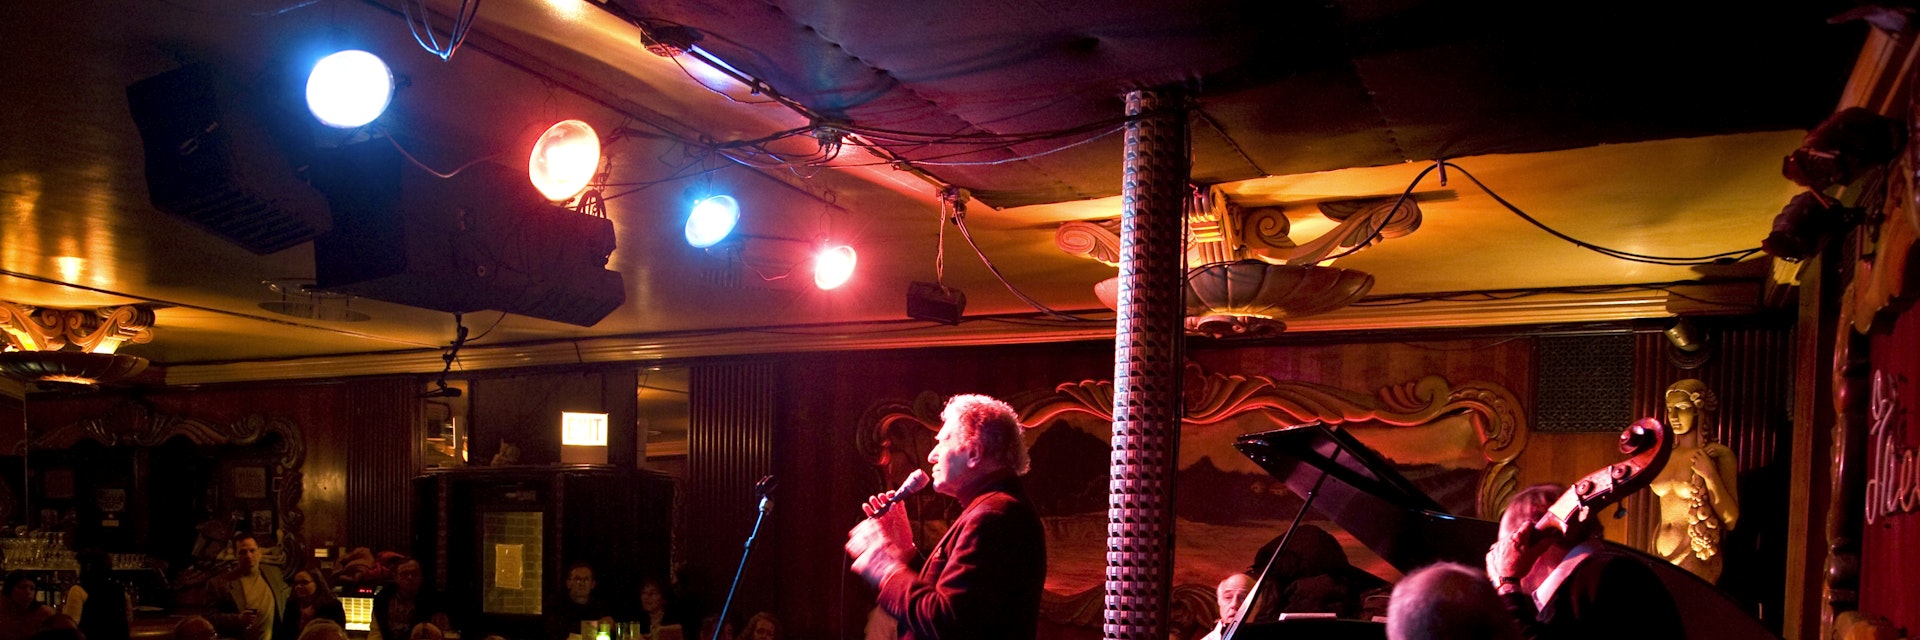 Frank D'Rone (Chicago jazz legend) performing on stage at Green Mill Cocktail Lounge, Uptown.